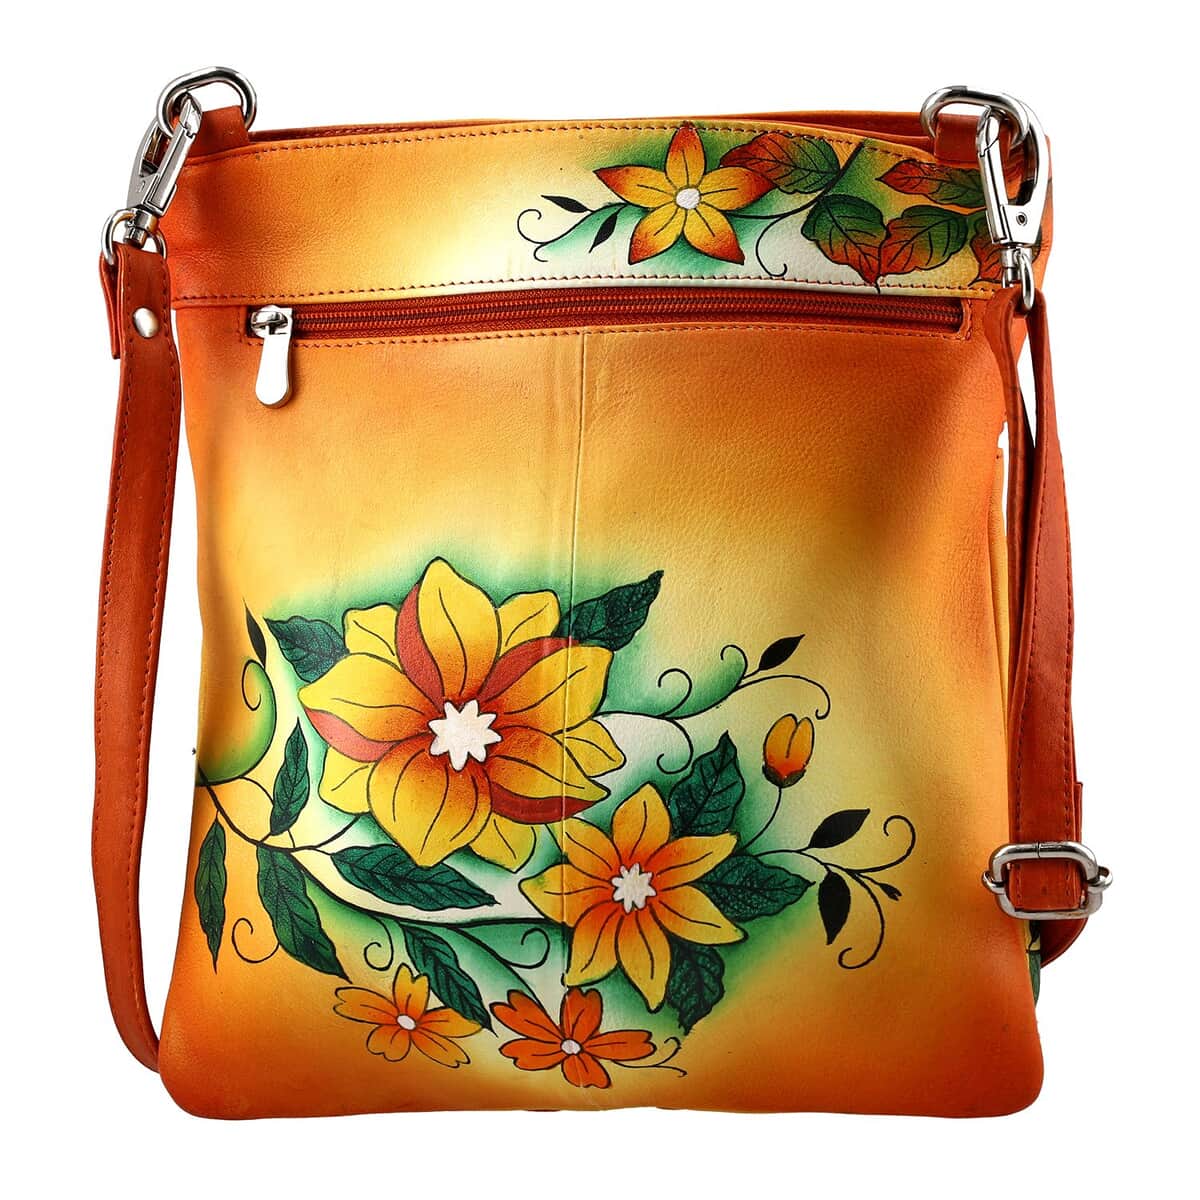 "SUKRITI Super Organized Floral Butterfly Hand Painted Genuine Leather Crossbody Bag Size: 10.5(L)x12(W) inches Color: Orange" image number 5